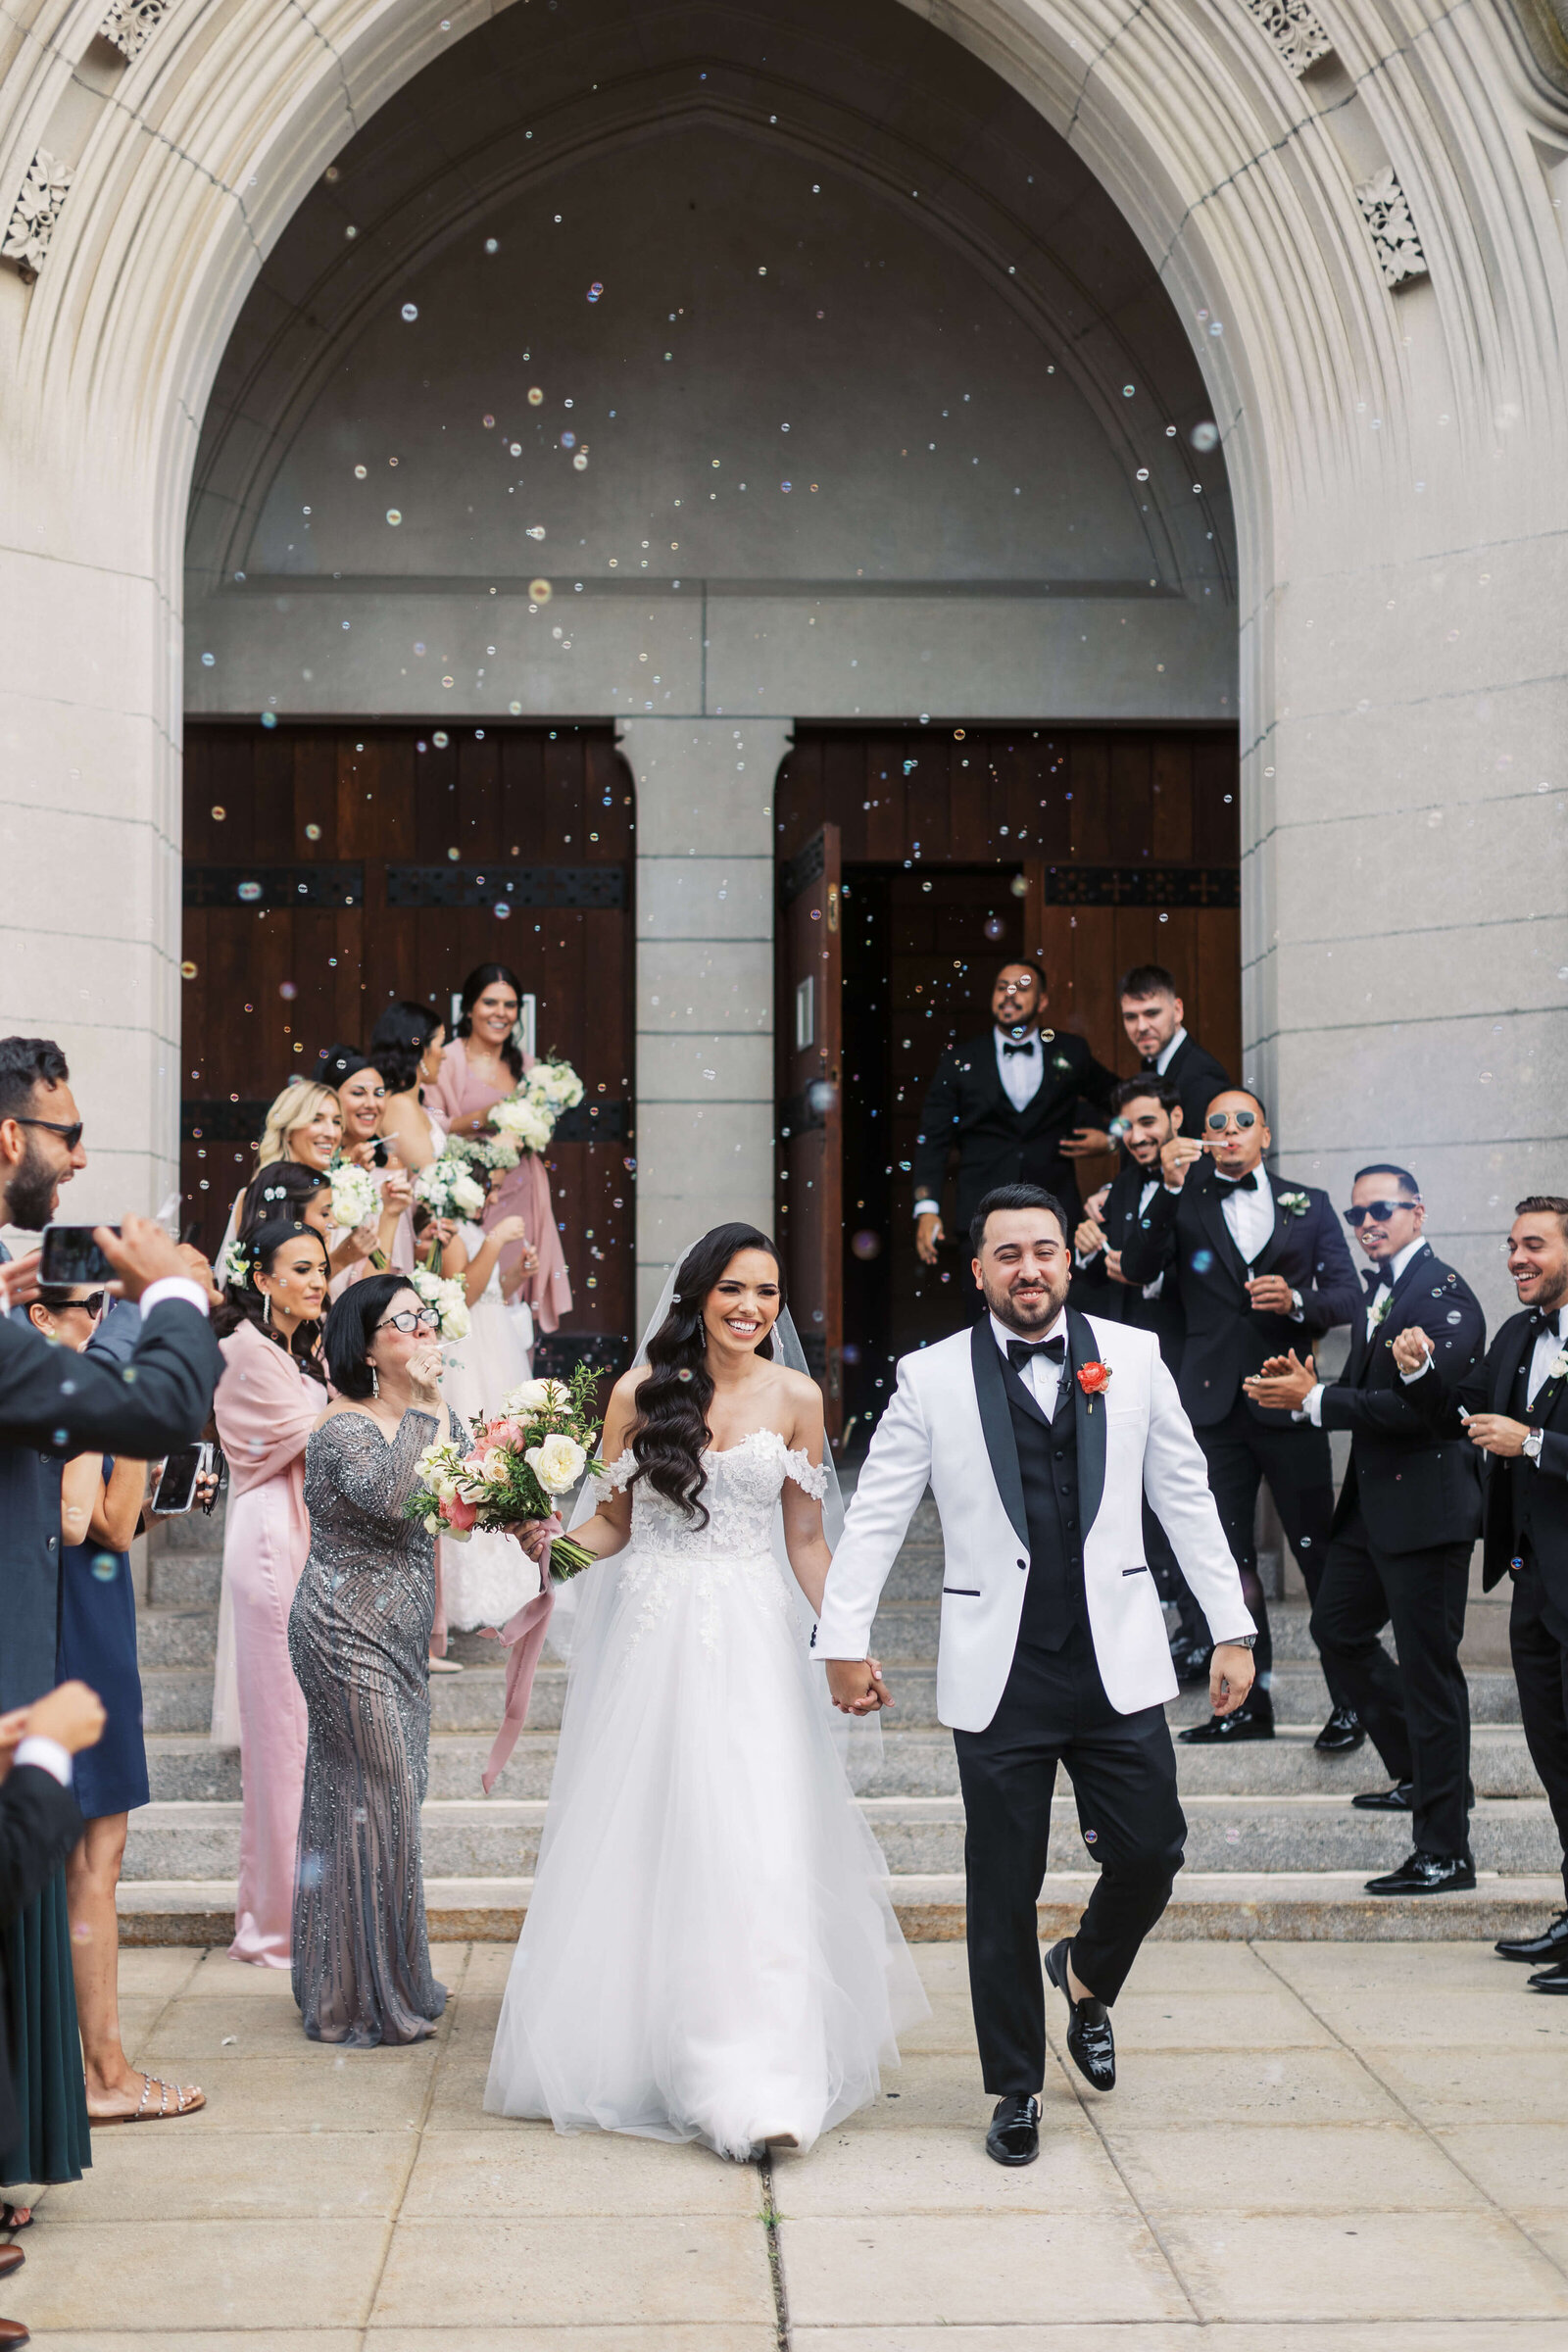 Husband and wife exit the church as their family and friends blow bubbles.